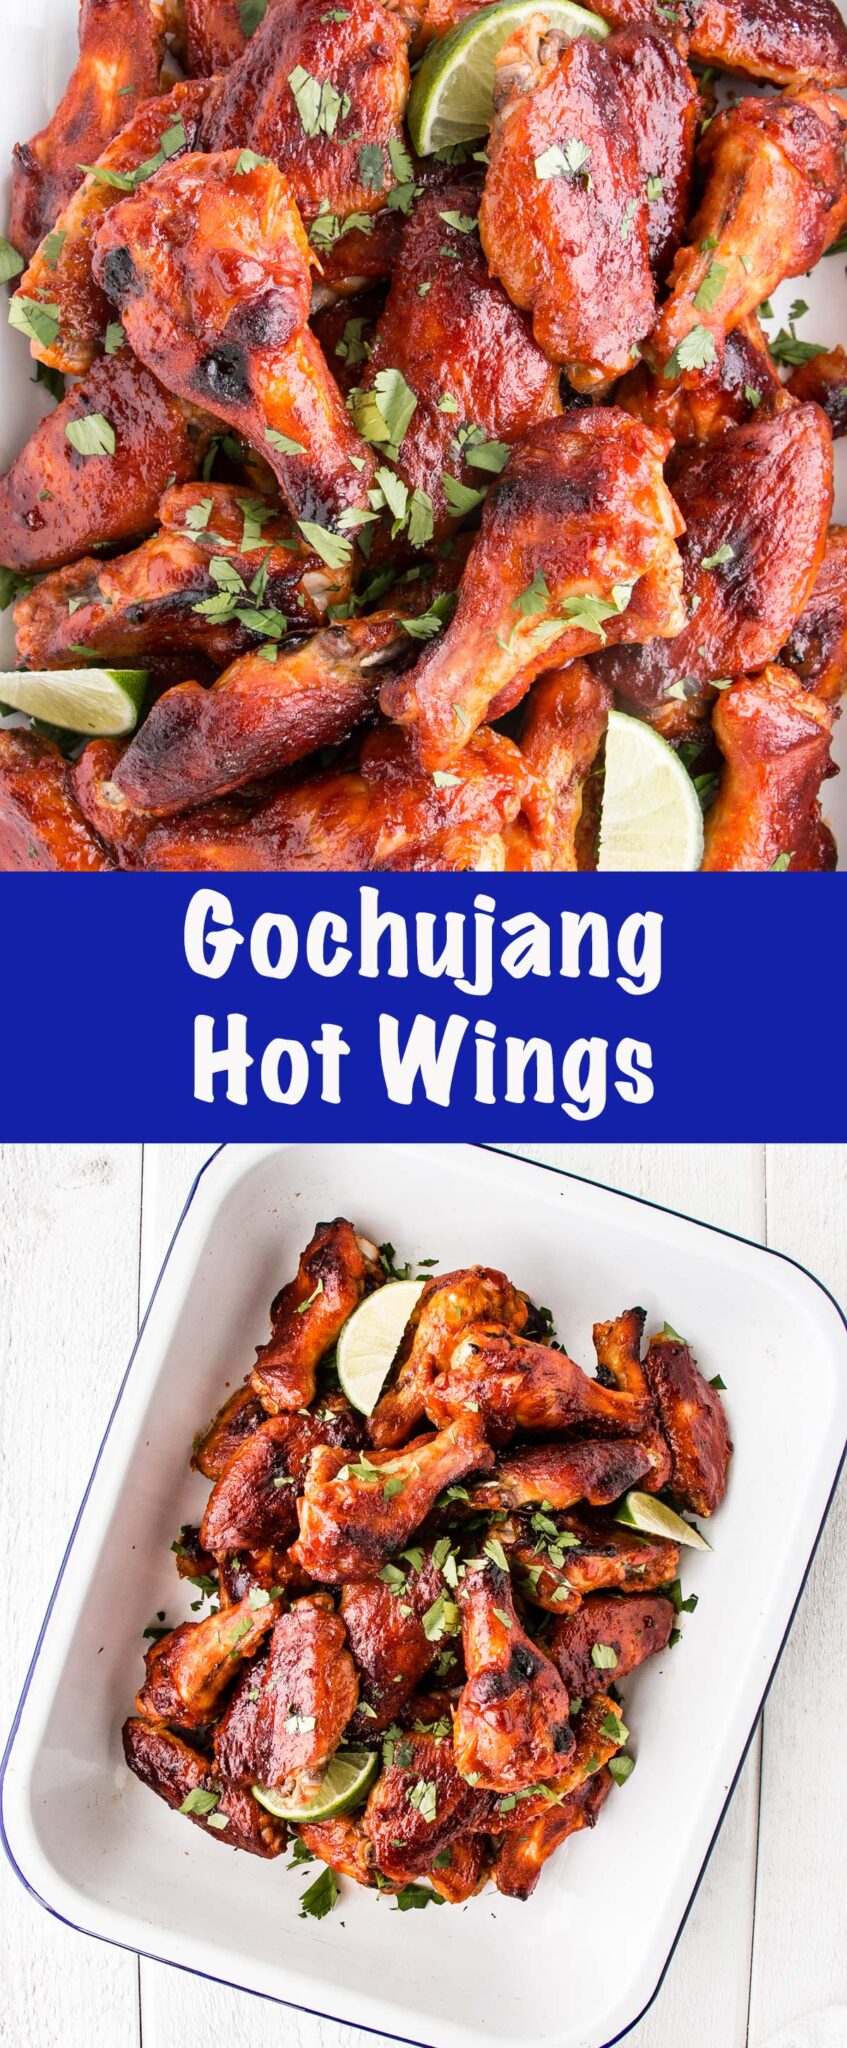 gochujang hot wings in a white serving tray - long collage